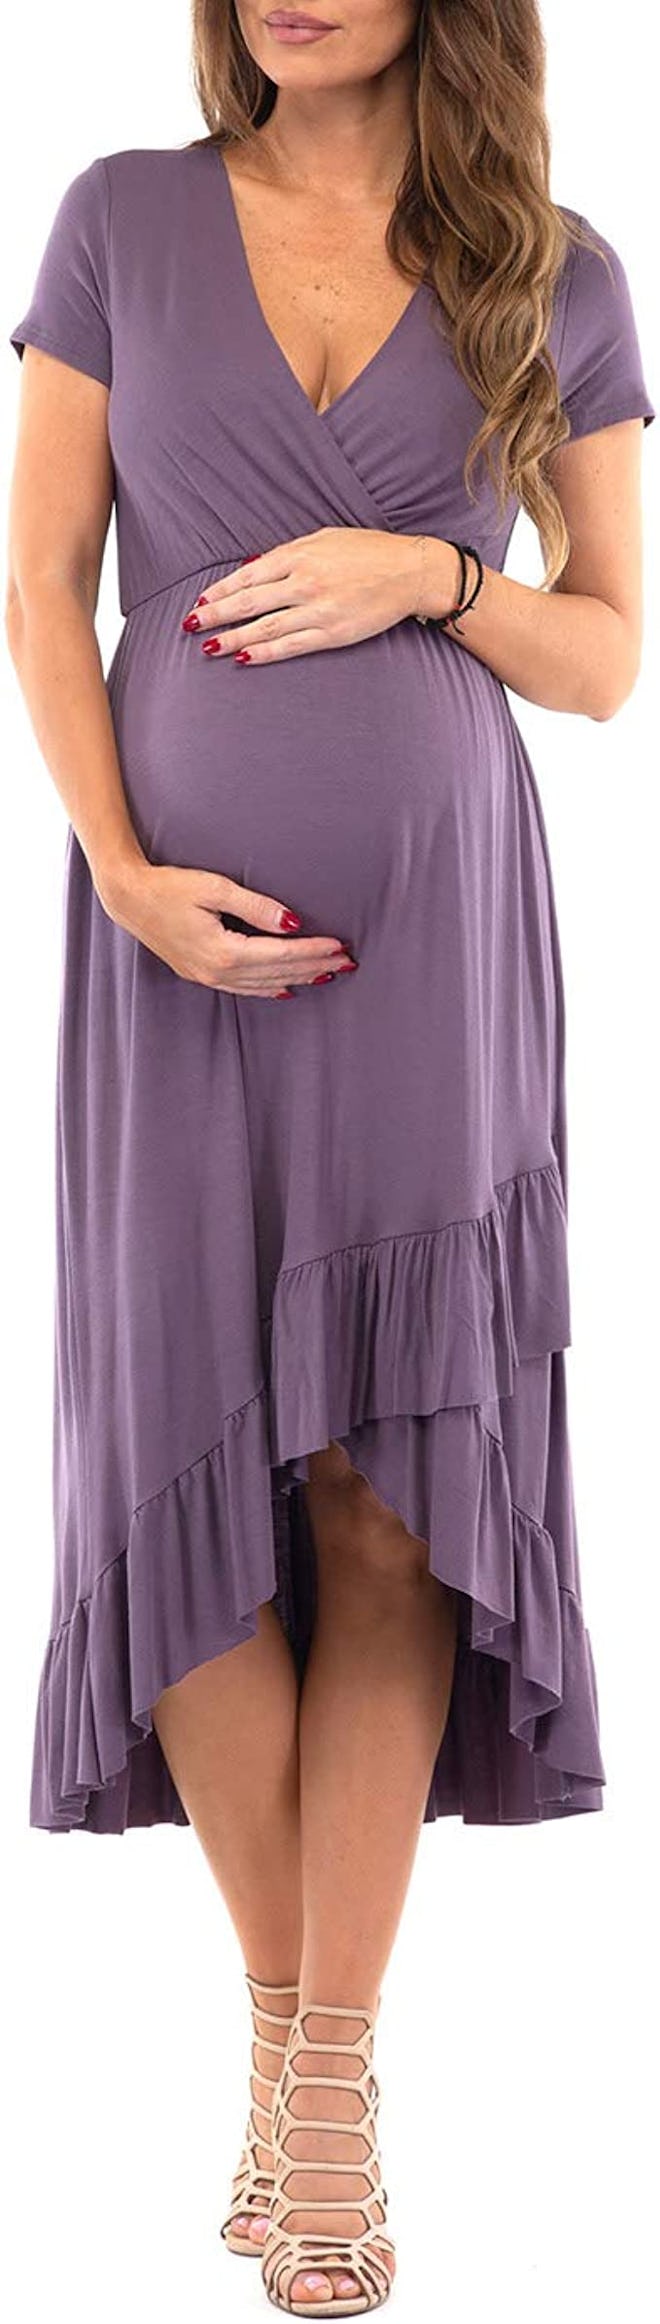 With its sweet ruffled hem, this Mother Bee style is one of the best maternity dresses for a photosh...